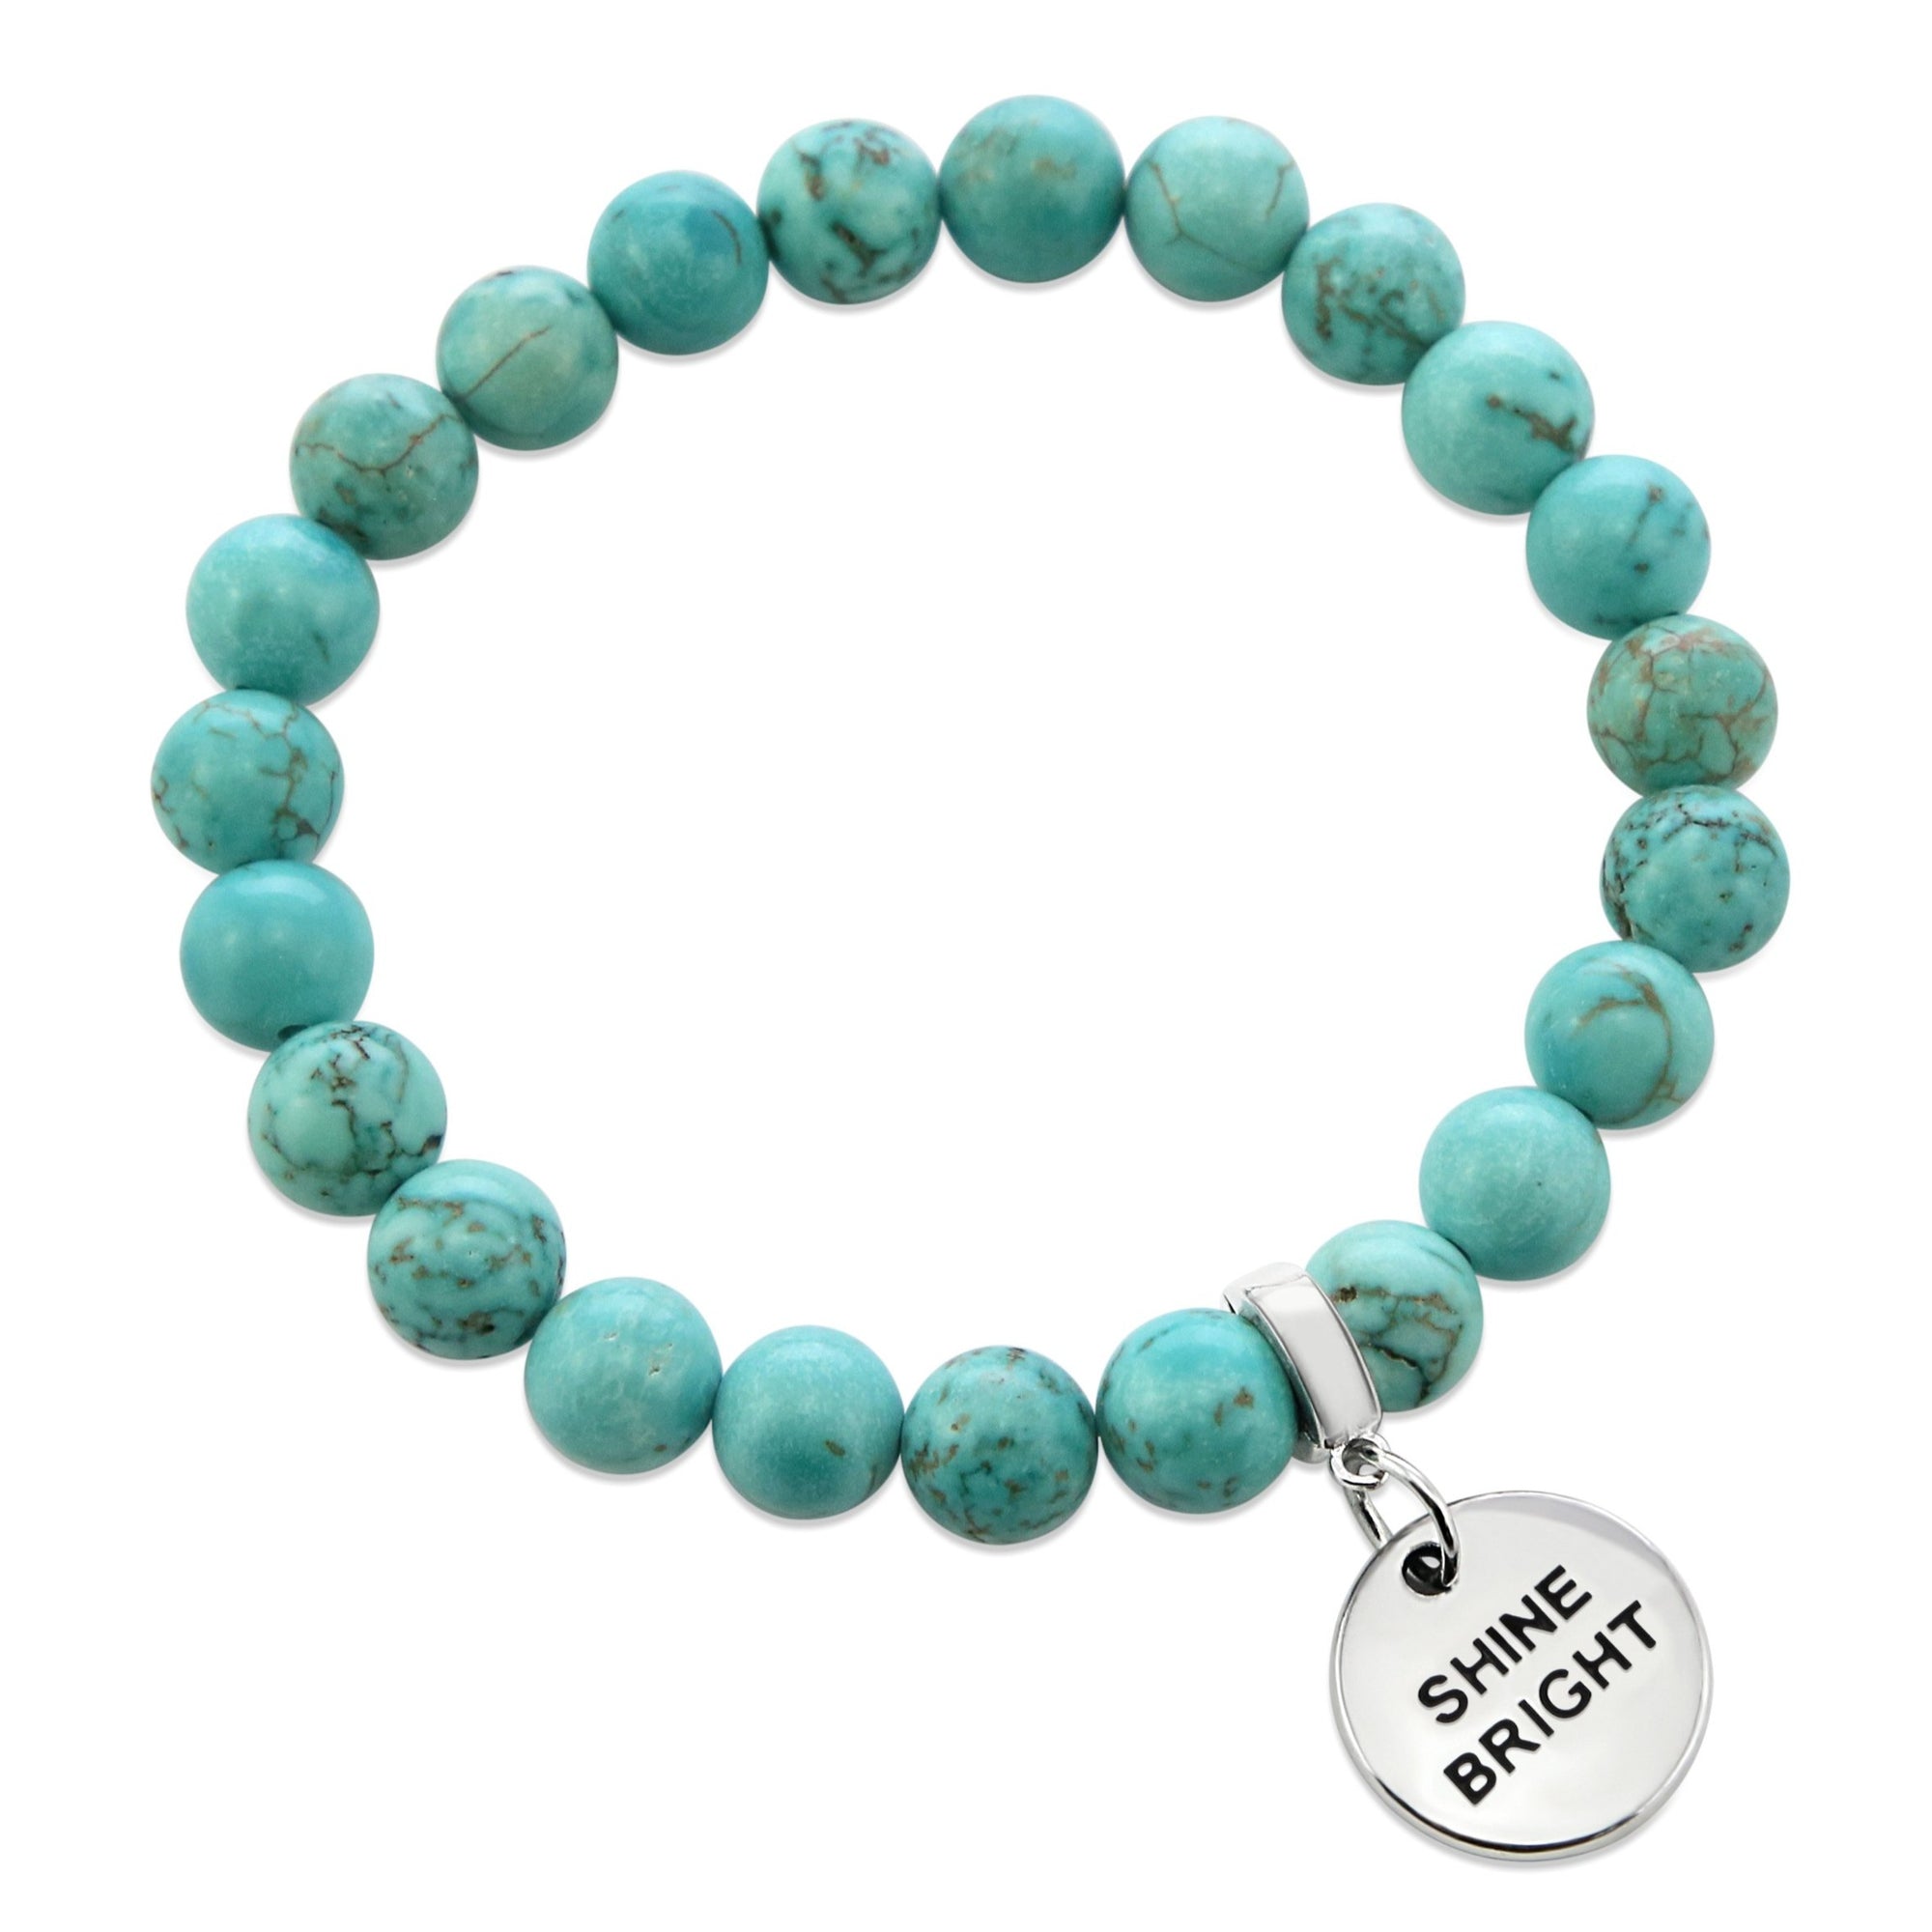 Stone Bracelet 8mm Aqua Breeze Turquoise - With Silver Word Charms